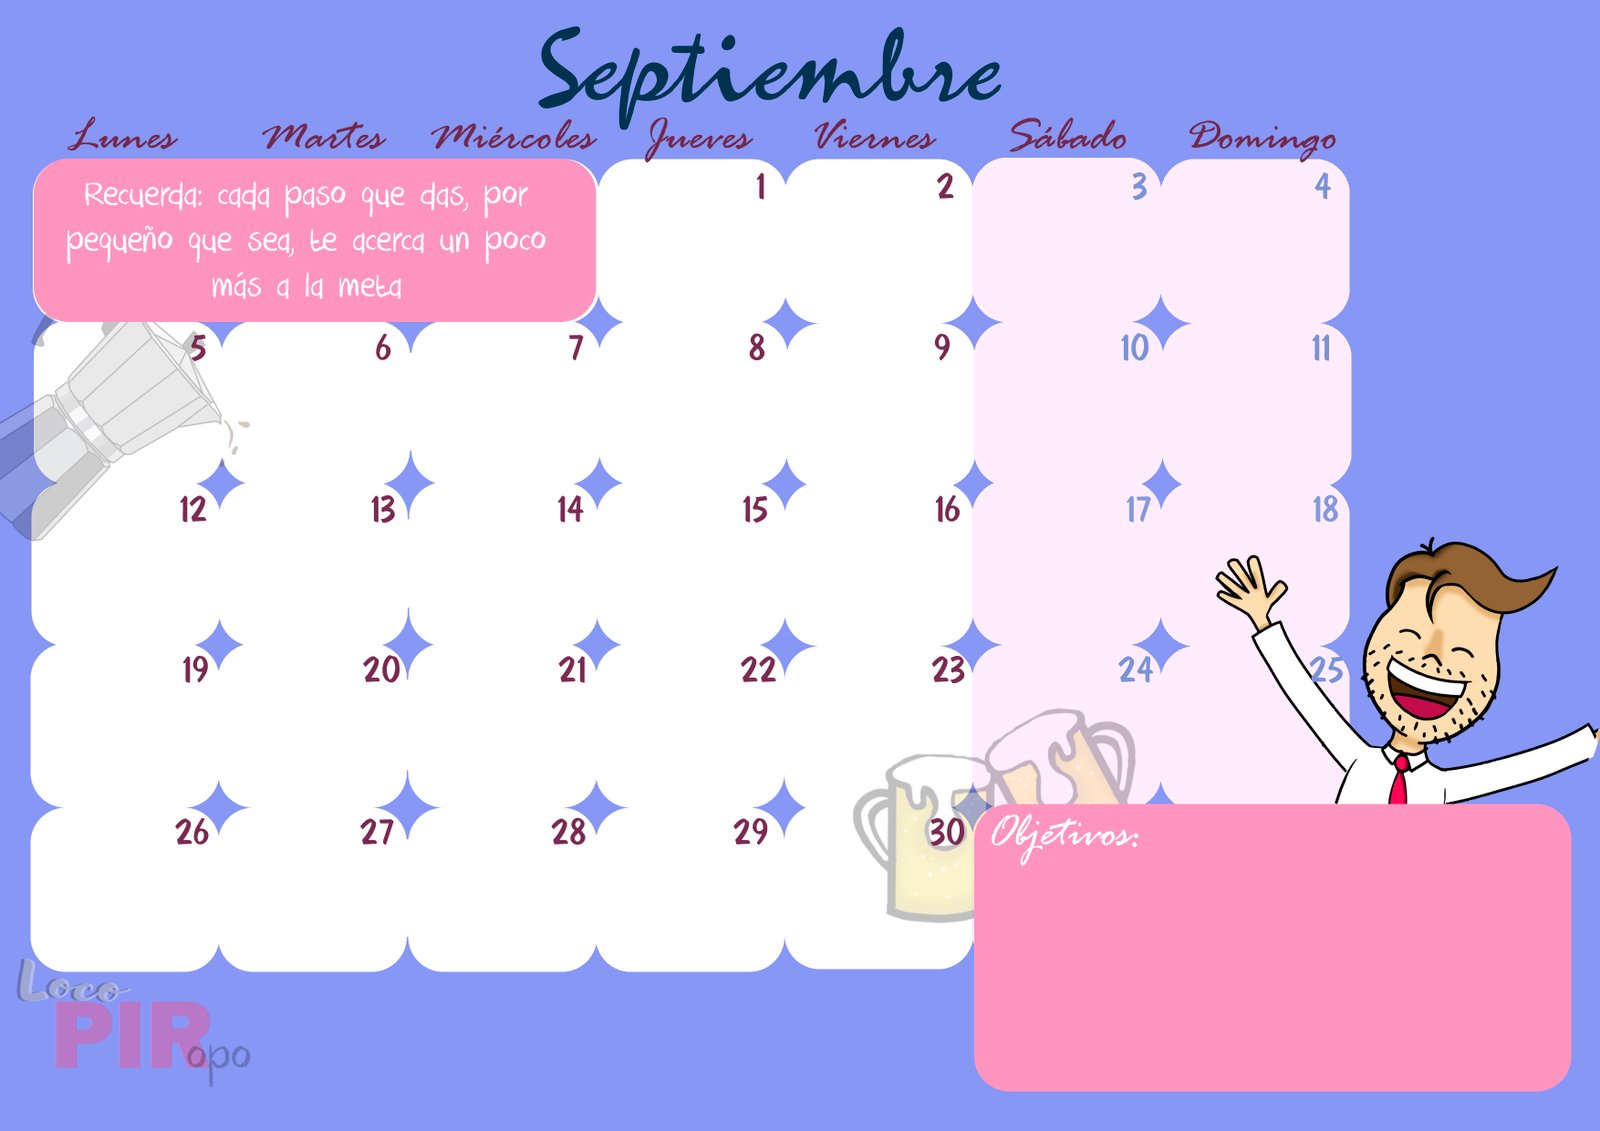 Planning septiembre